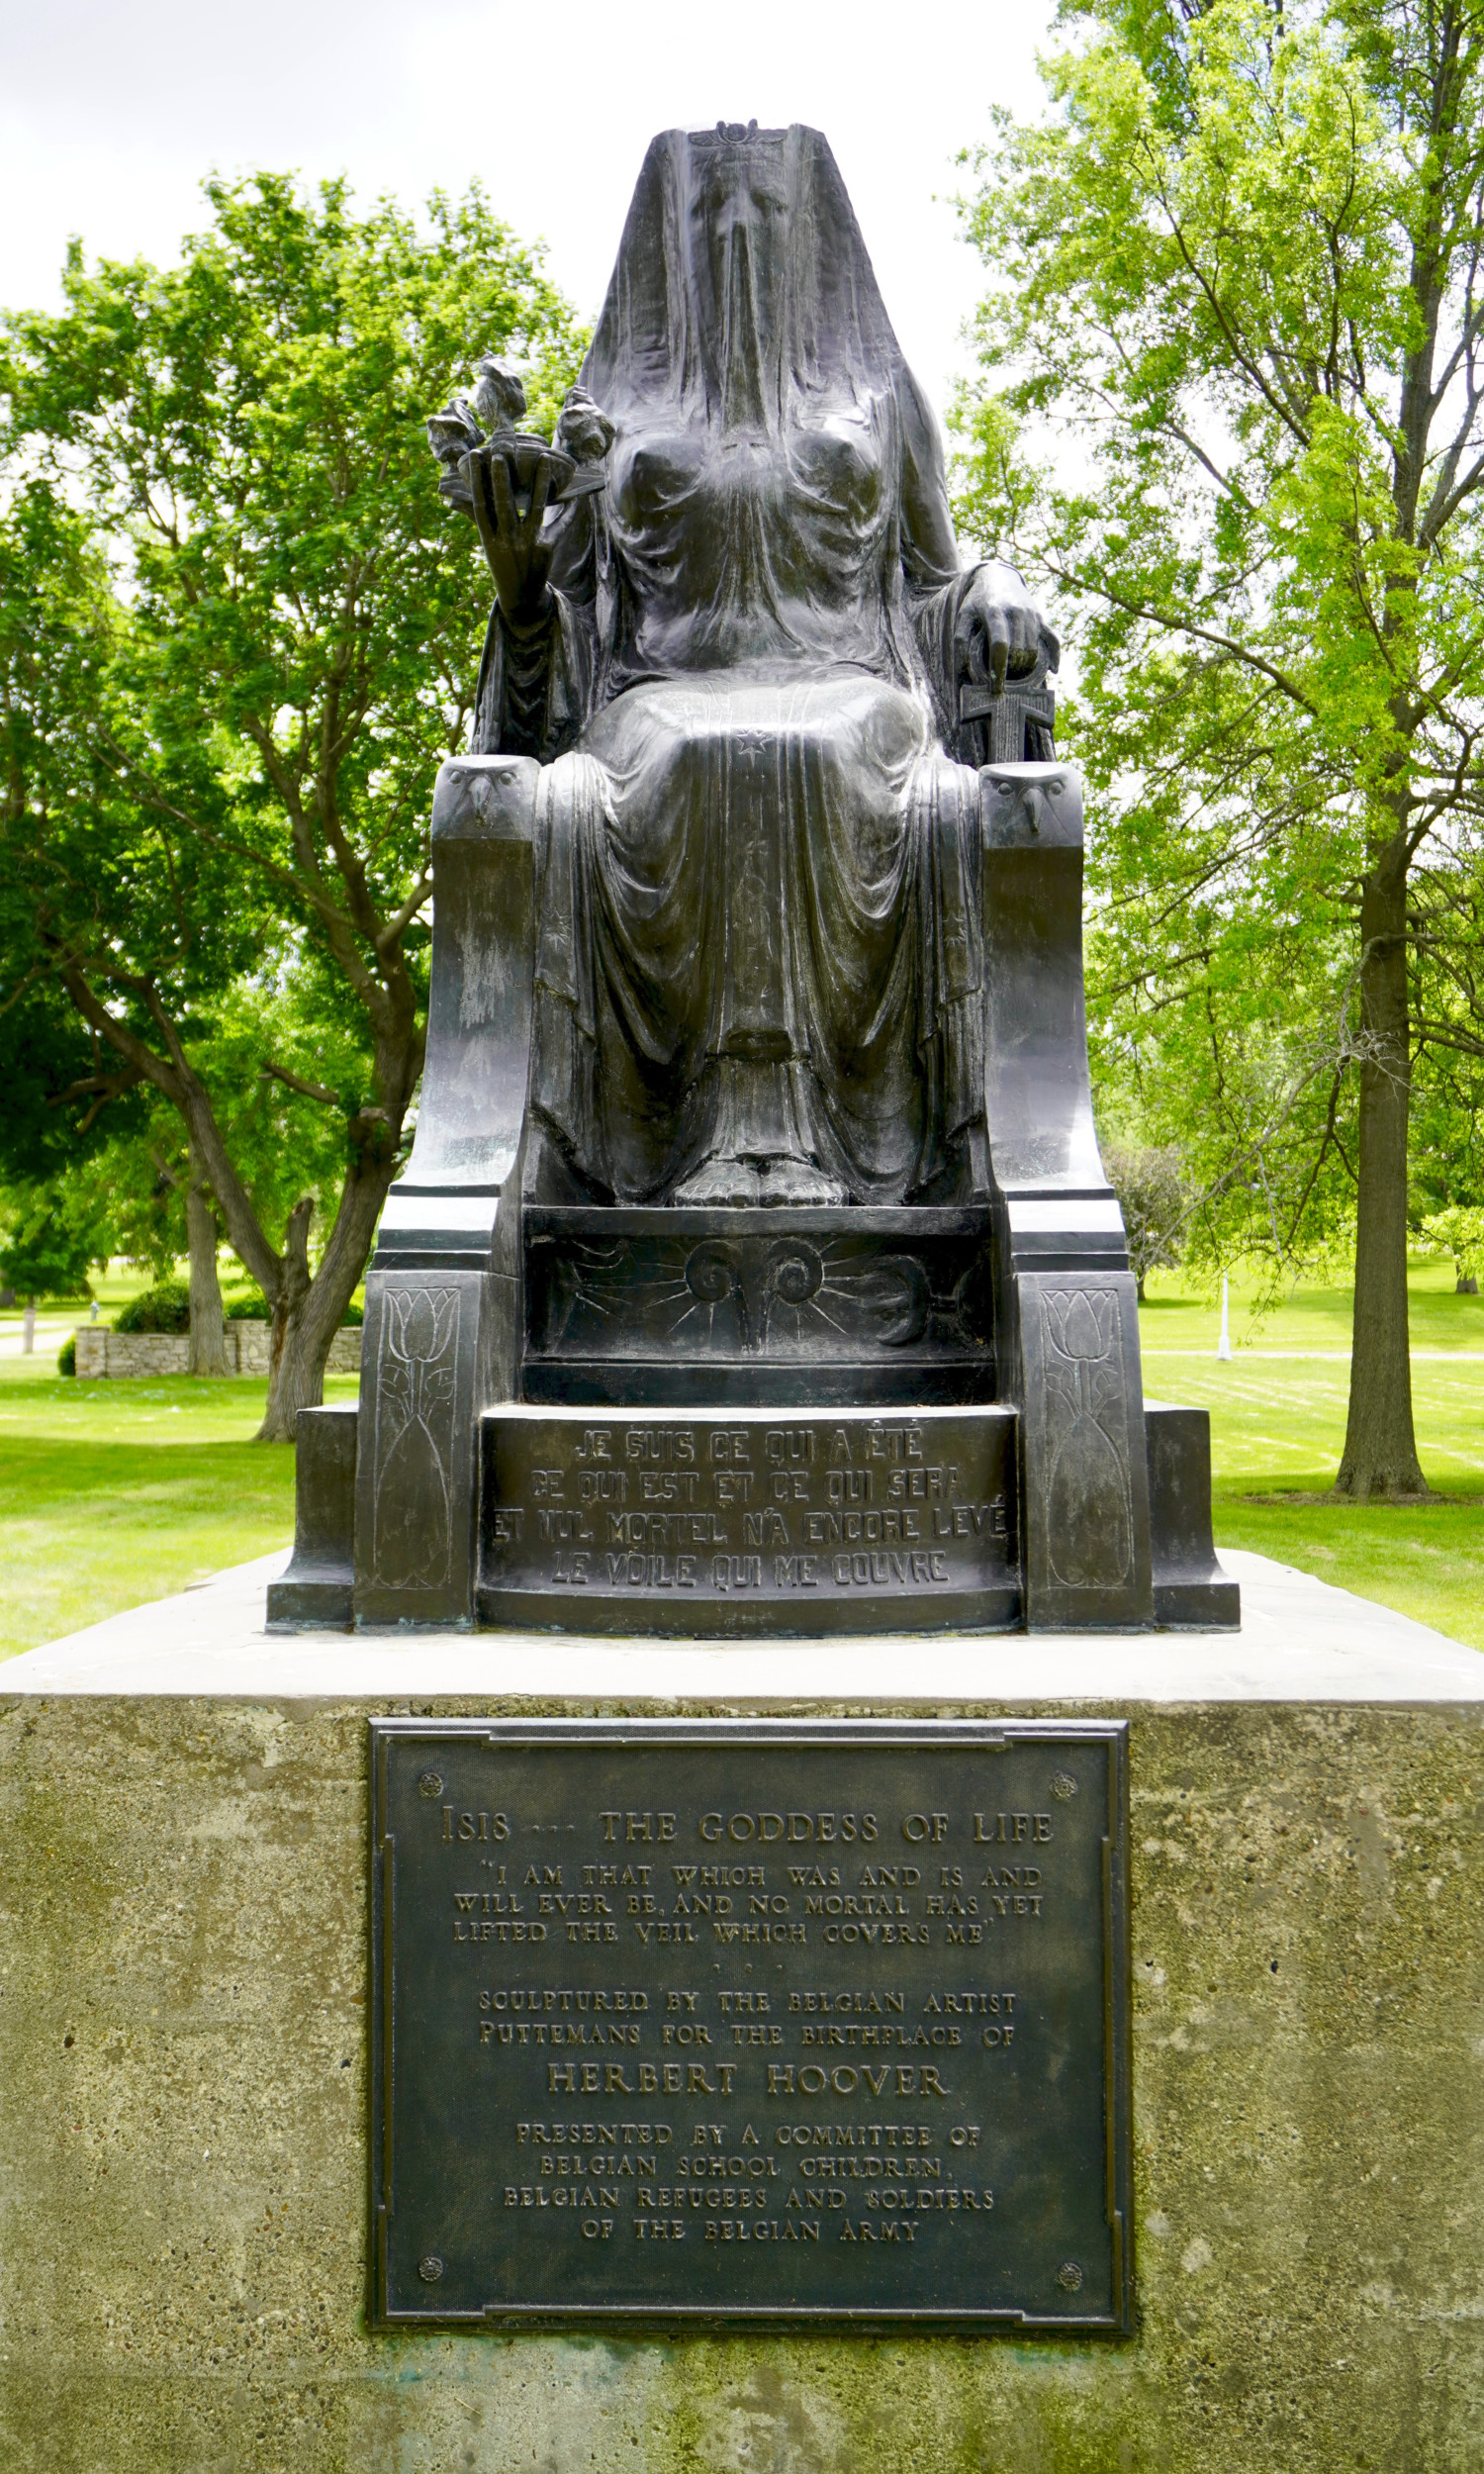 Statue of Isis in West Branch, Iowa